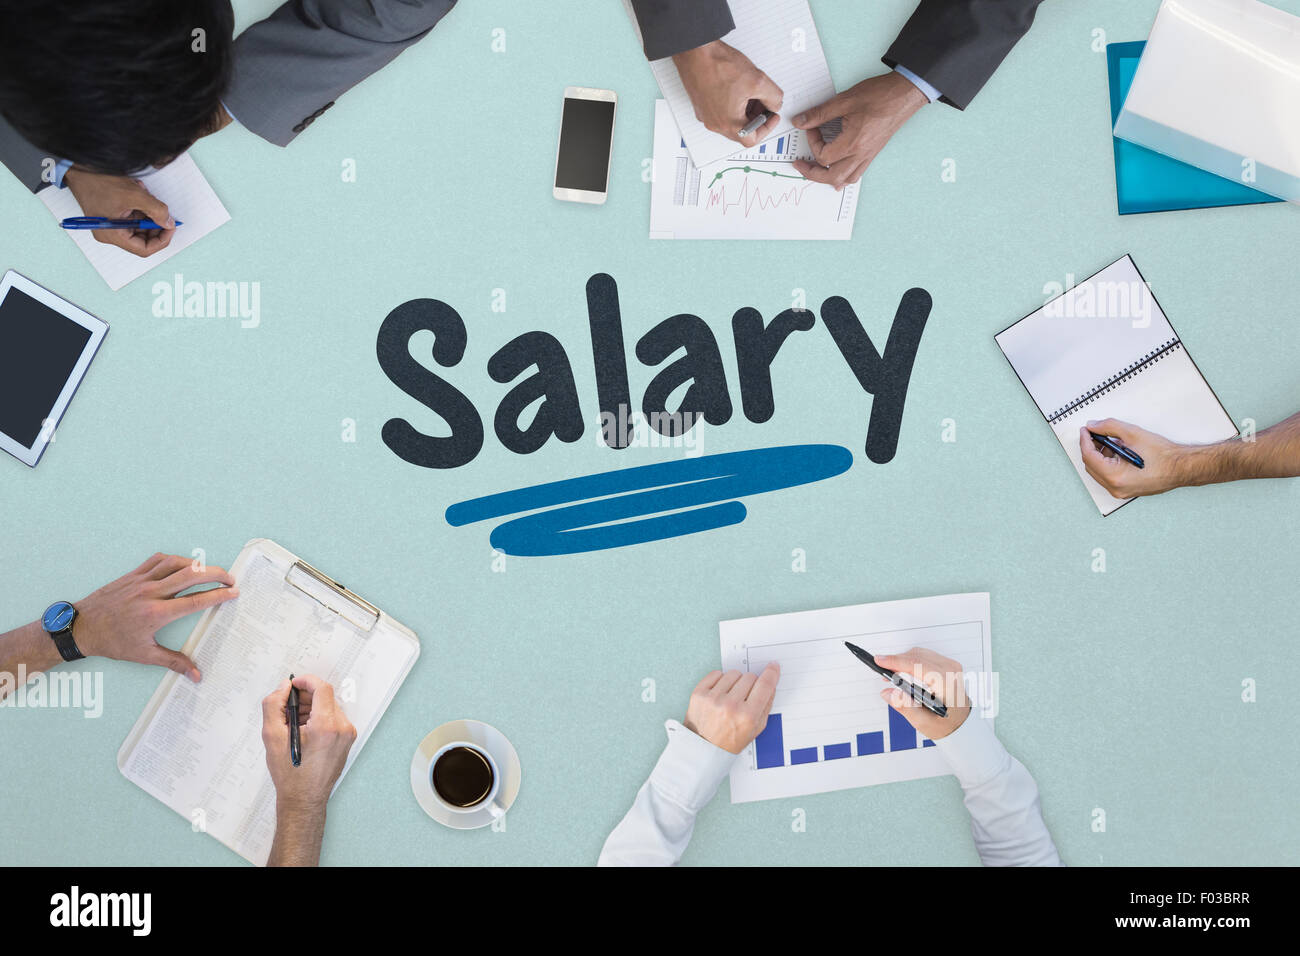 Salary against business meeting Stock Photo